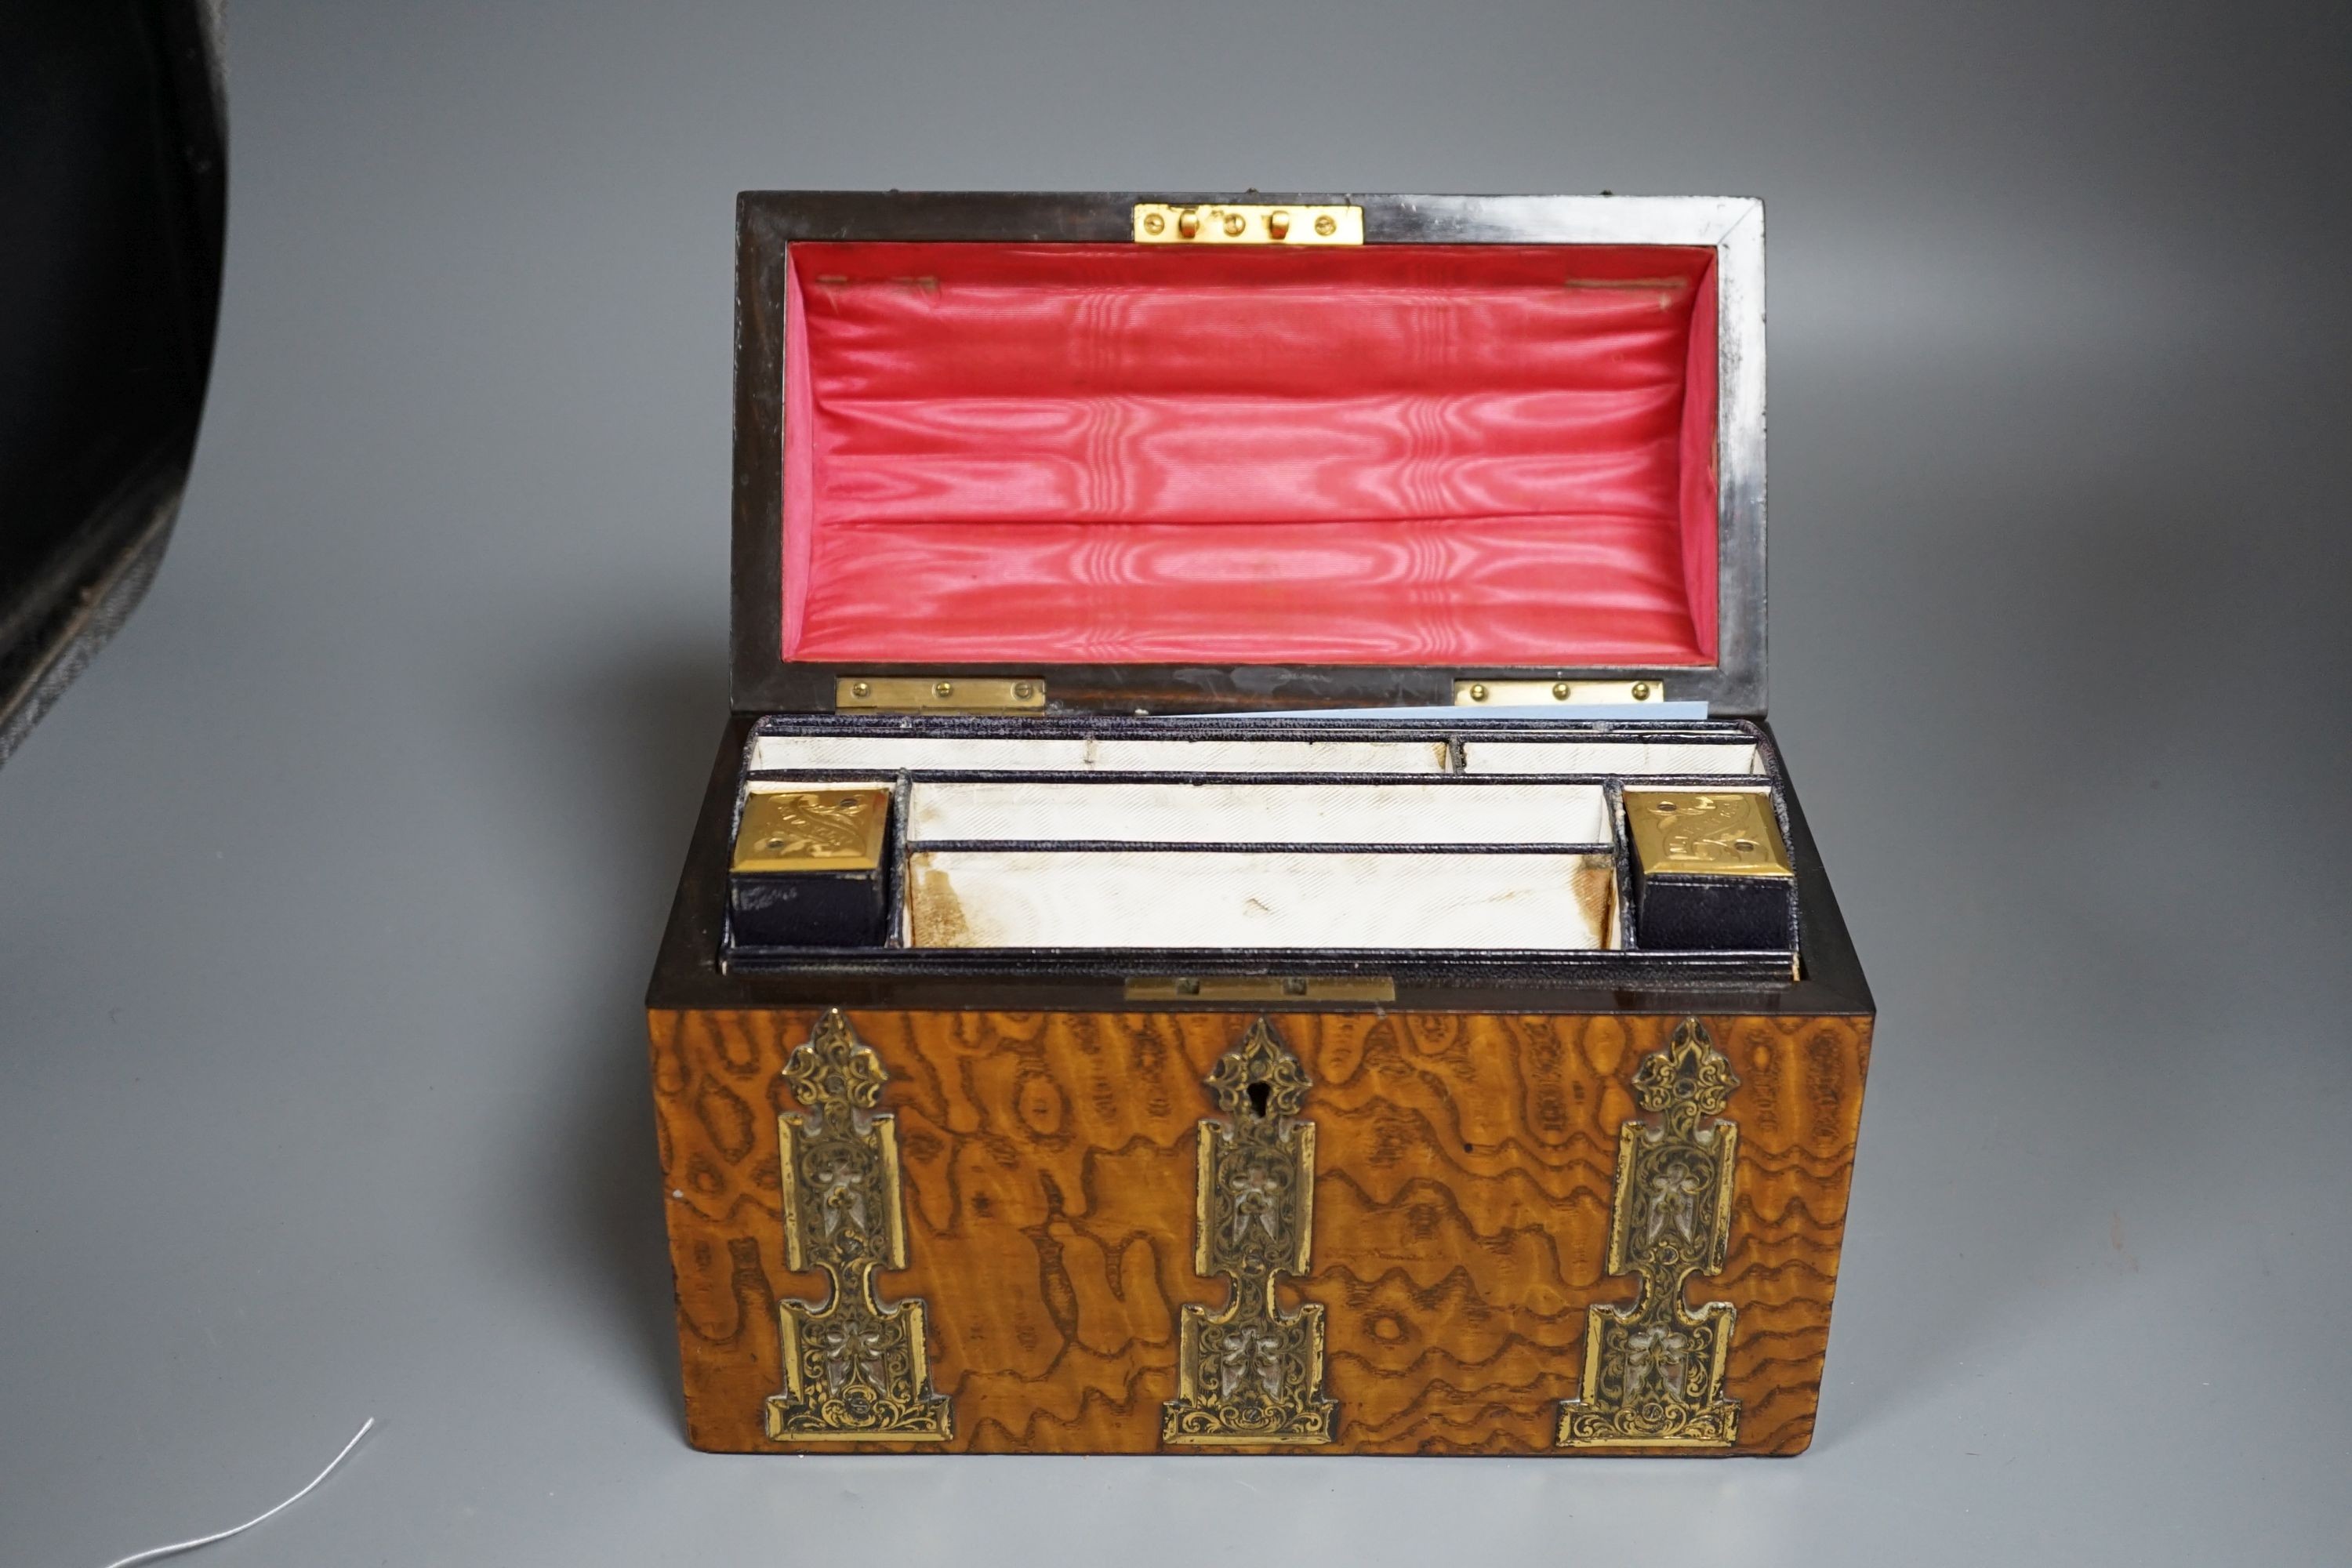 A Victorian Hungarian ash stationery box by Mechi, 114 Regent Street London, domed top with decorative gilt mounts fitted interior with 